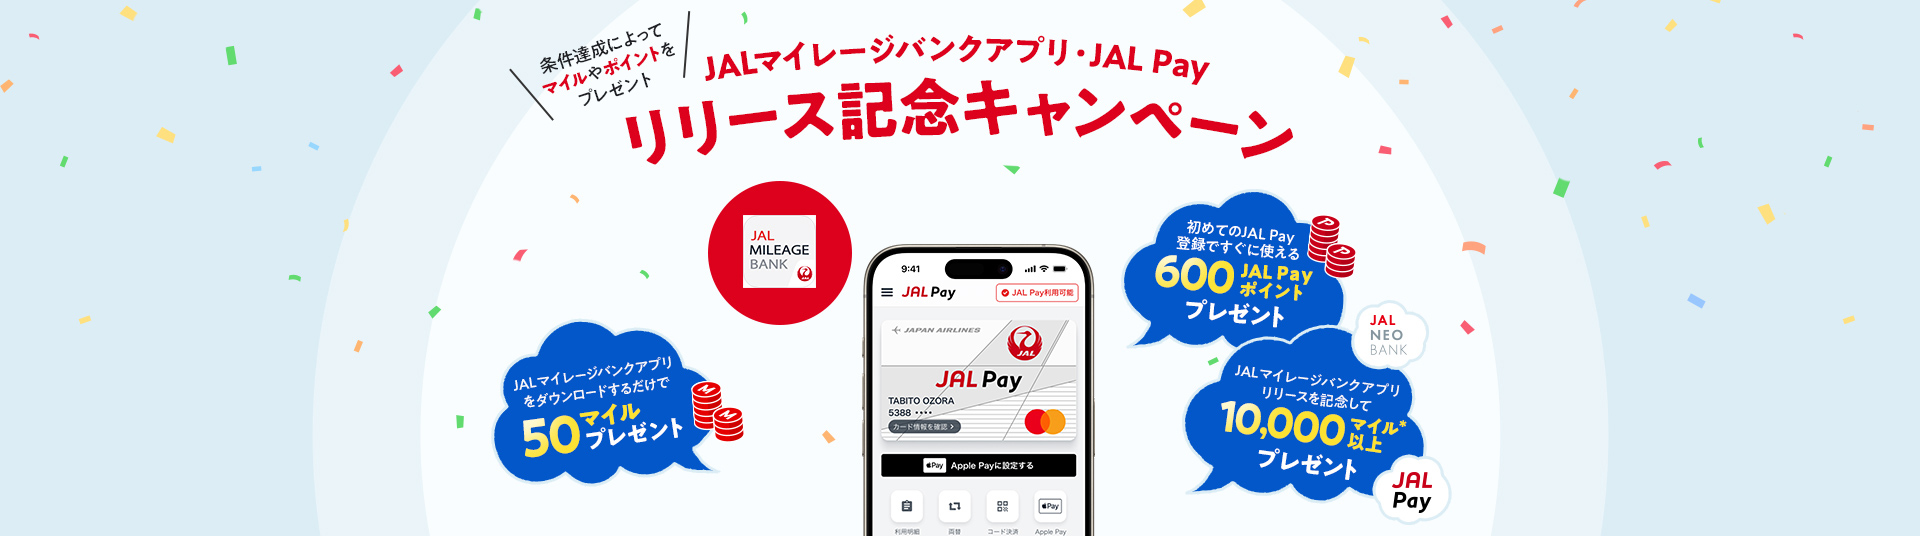 JAL Pay リリース記念キャンペーン